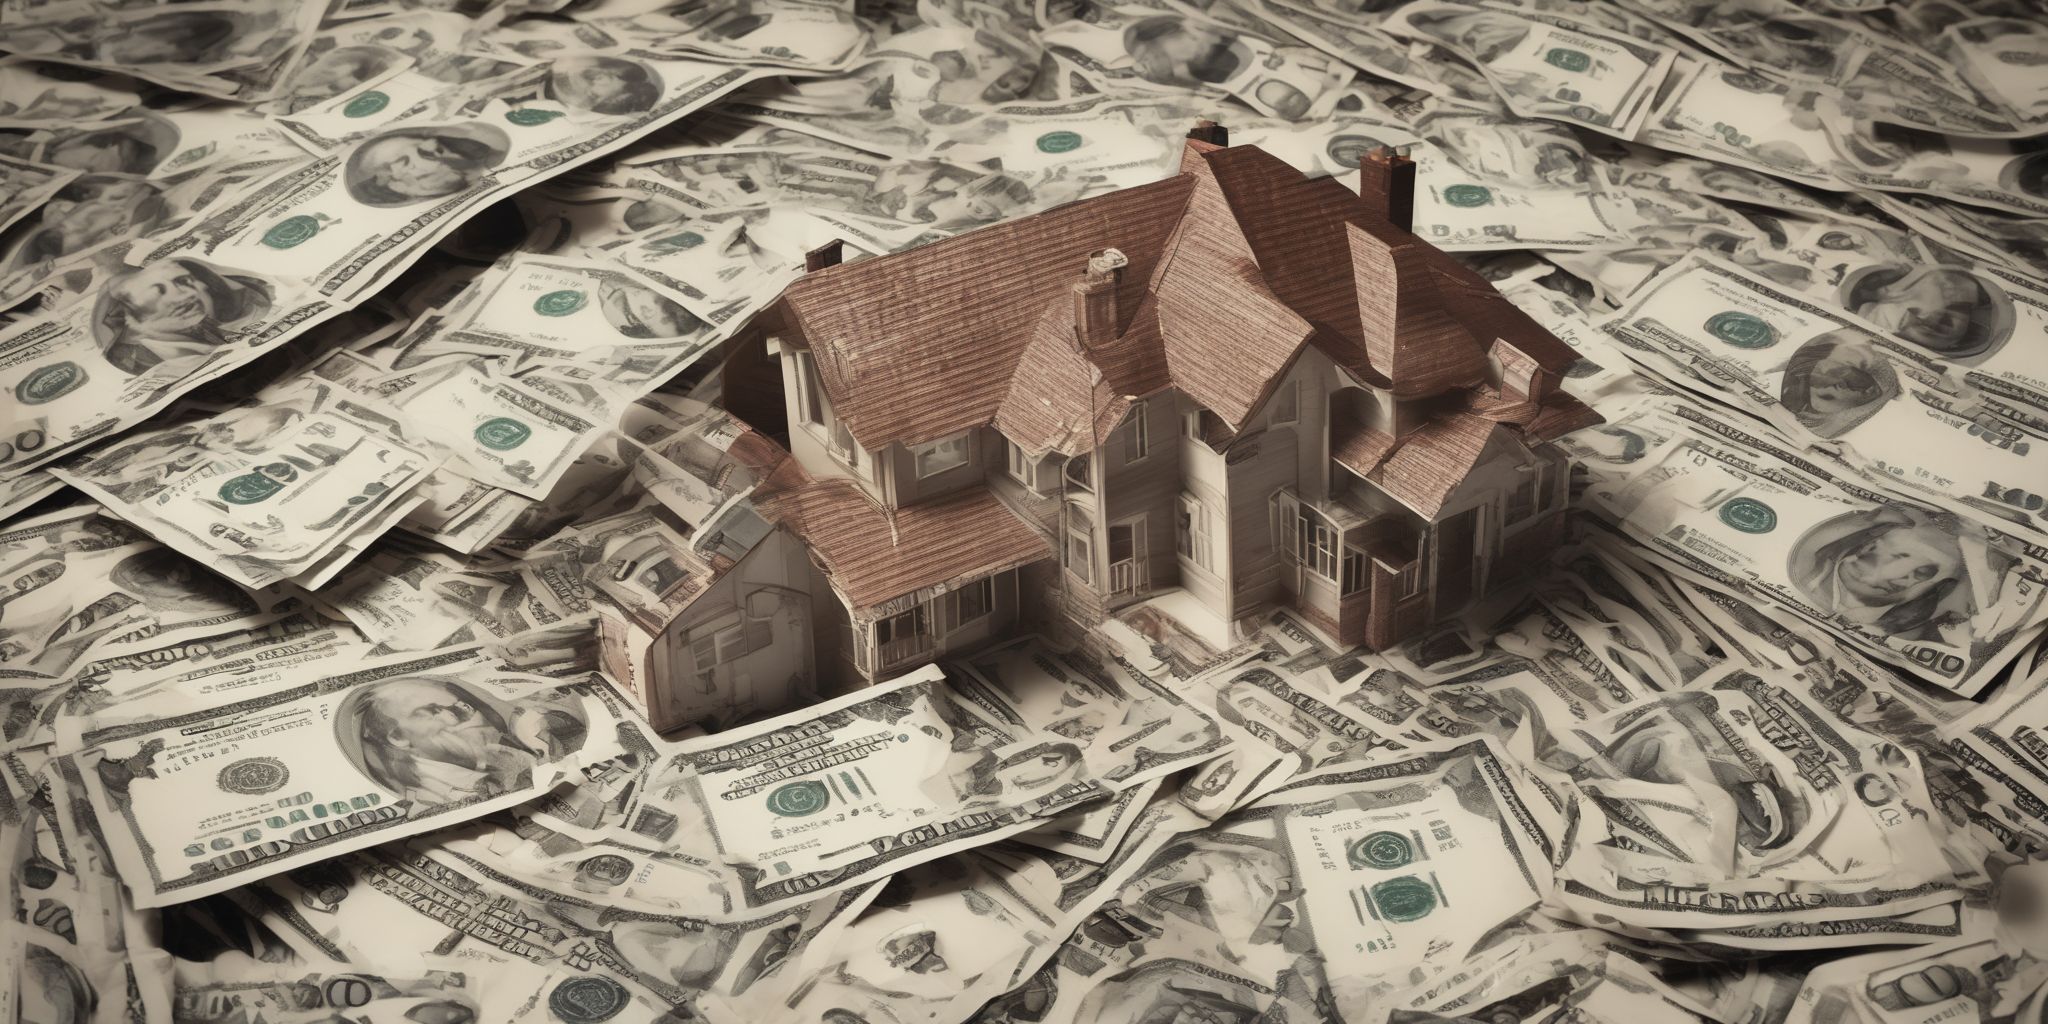 Loan settlement  in realistic, photographic style